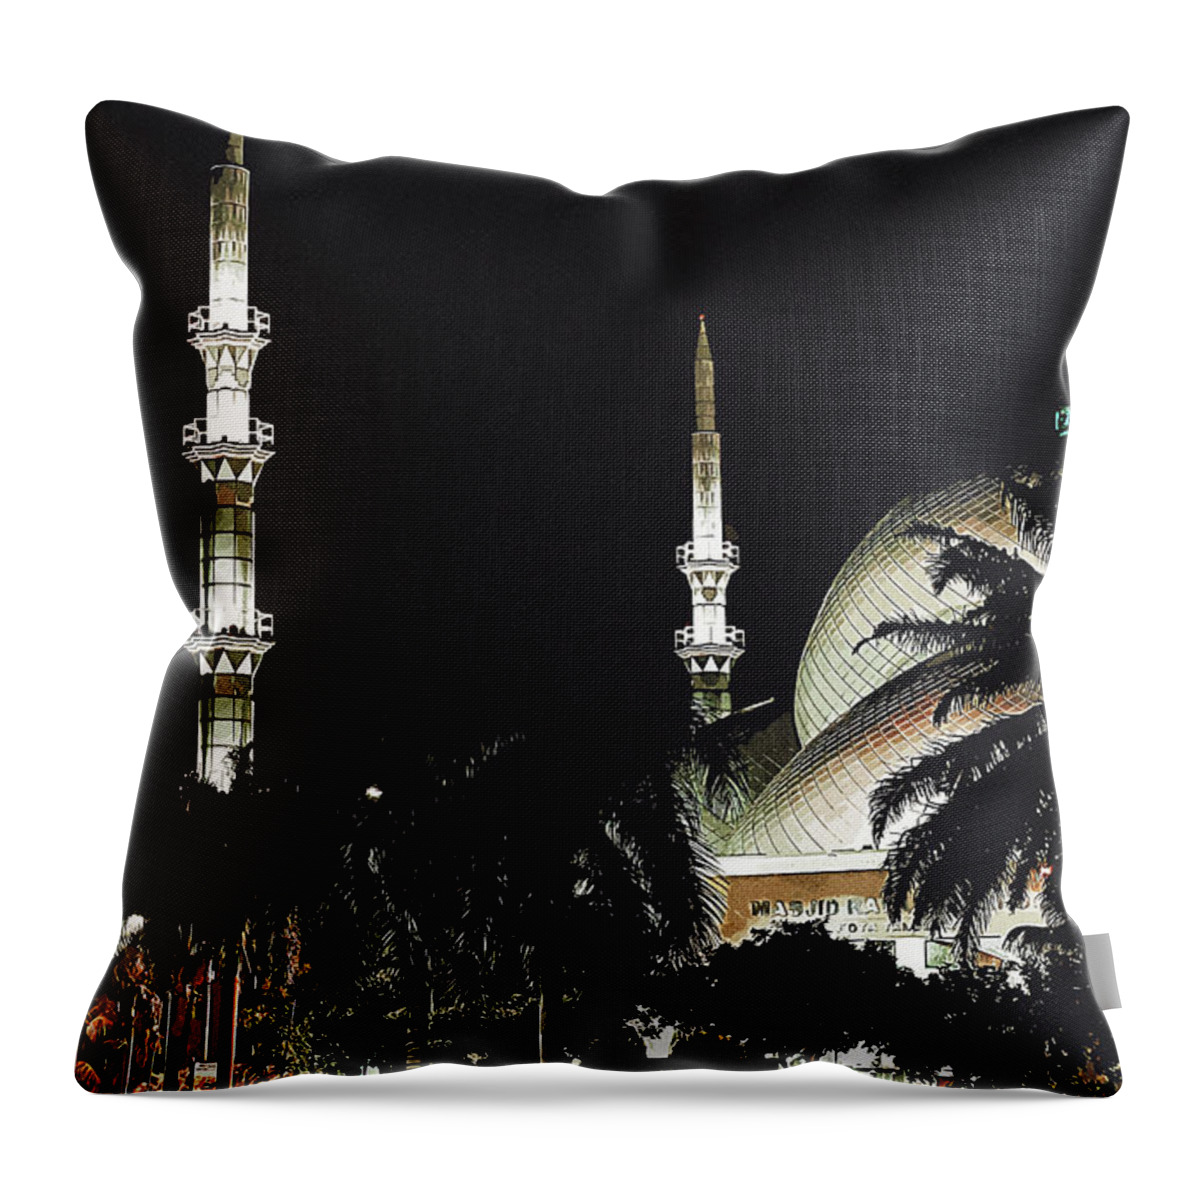 Icon Throw Pillow featuring the painting Best Minarets - Islamic Architecture, Minarets Lit Up at Night Free Stock Photo by Celestial Images